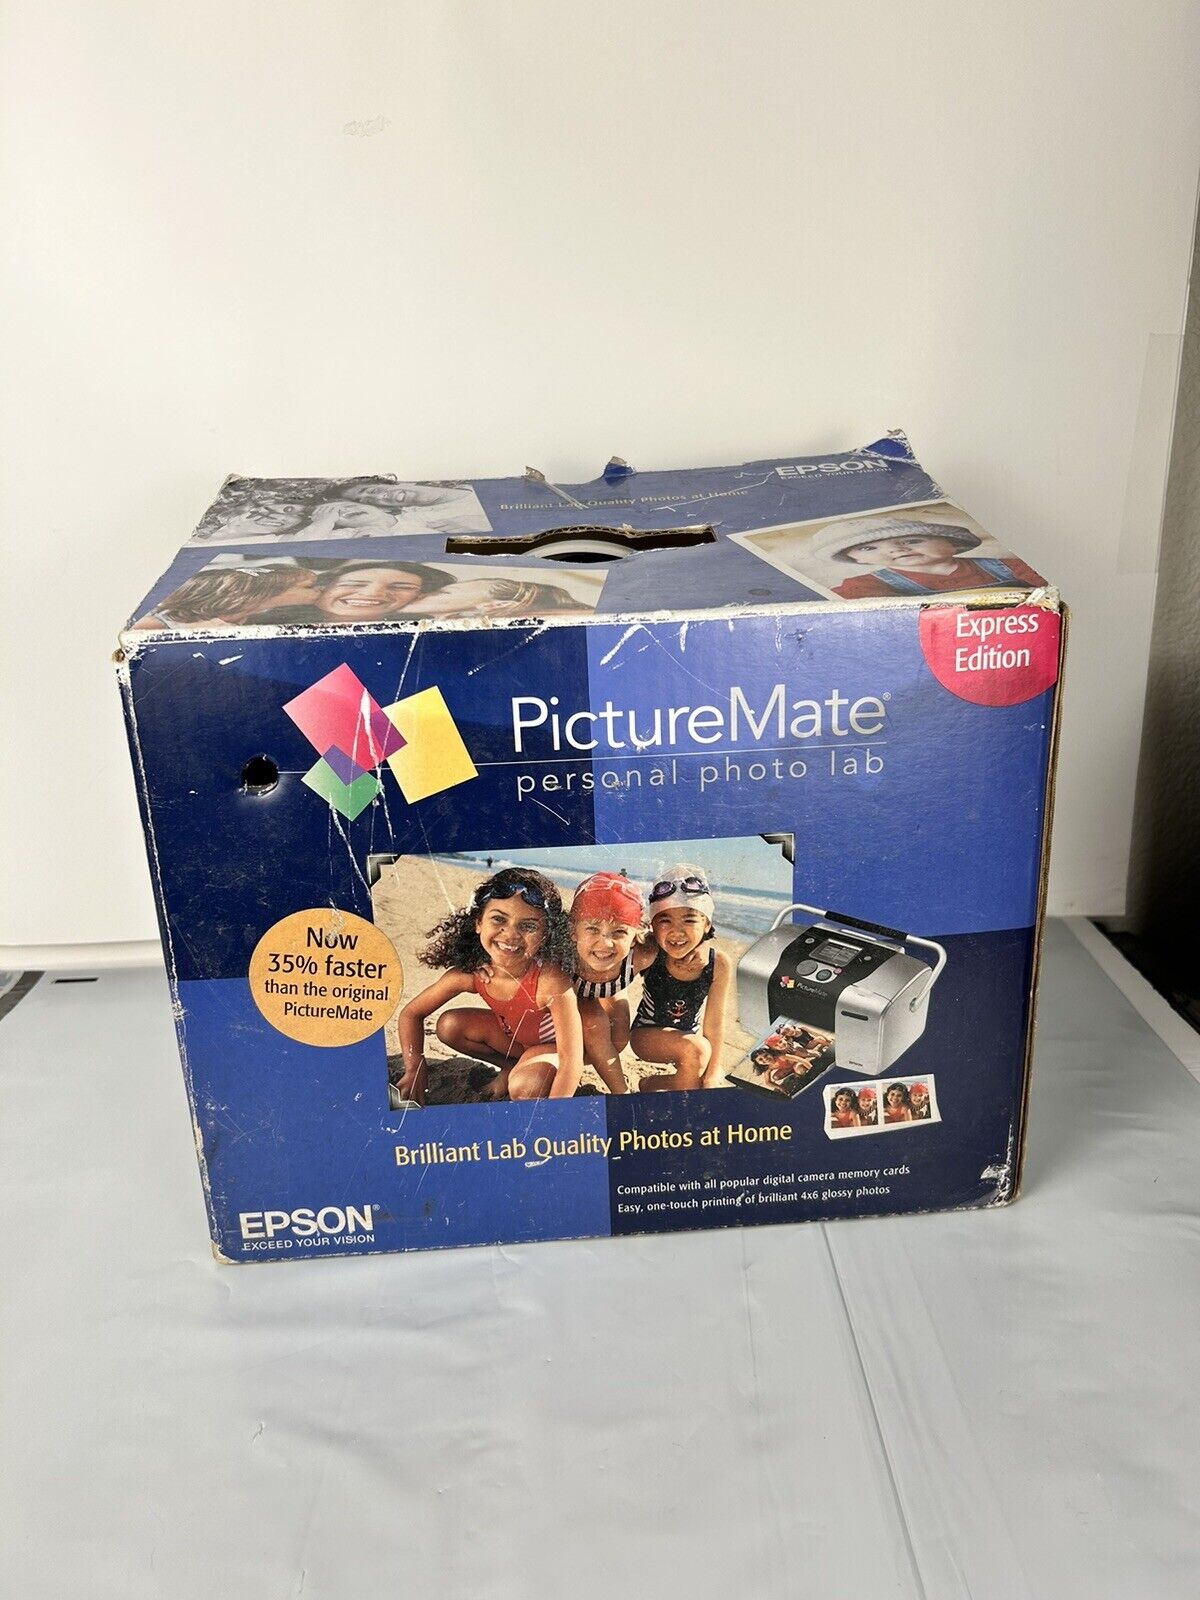 Epson Picture Mate Express Edition Personal Photo Lab Portable Color Printer